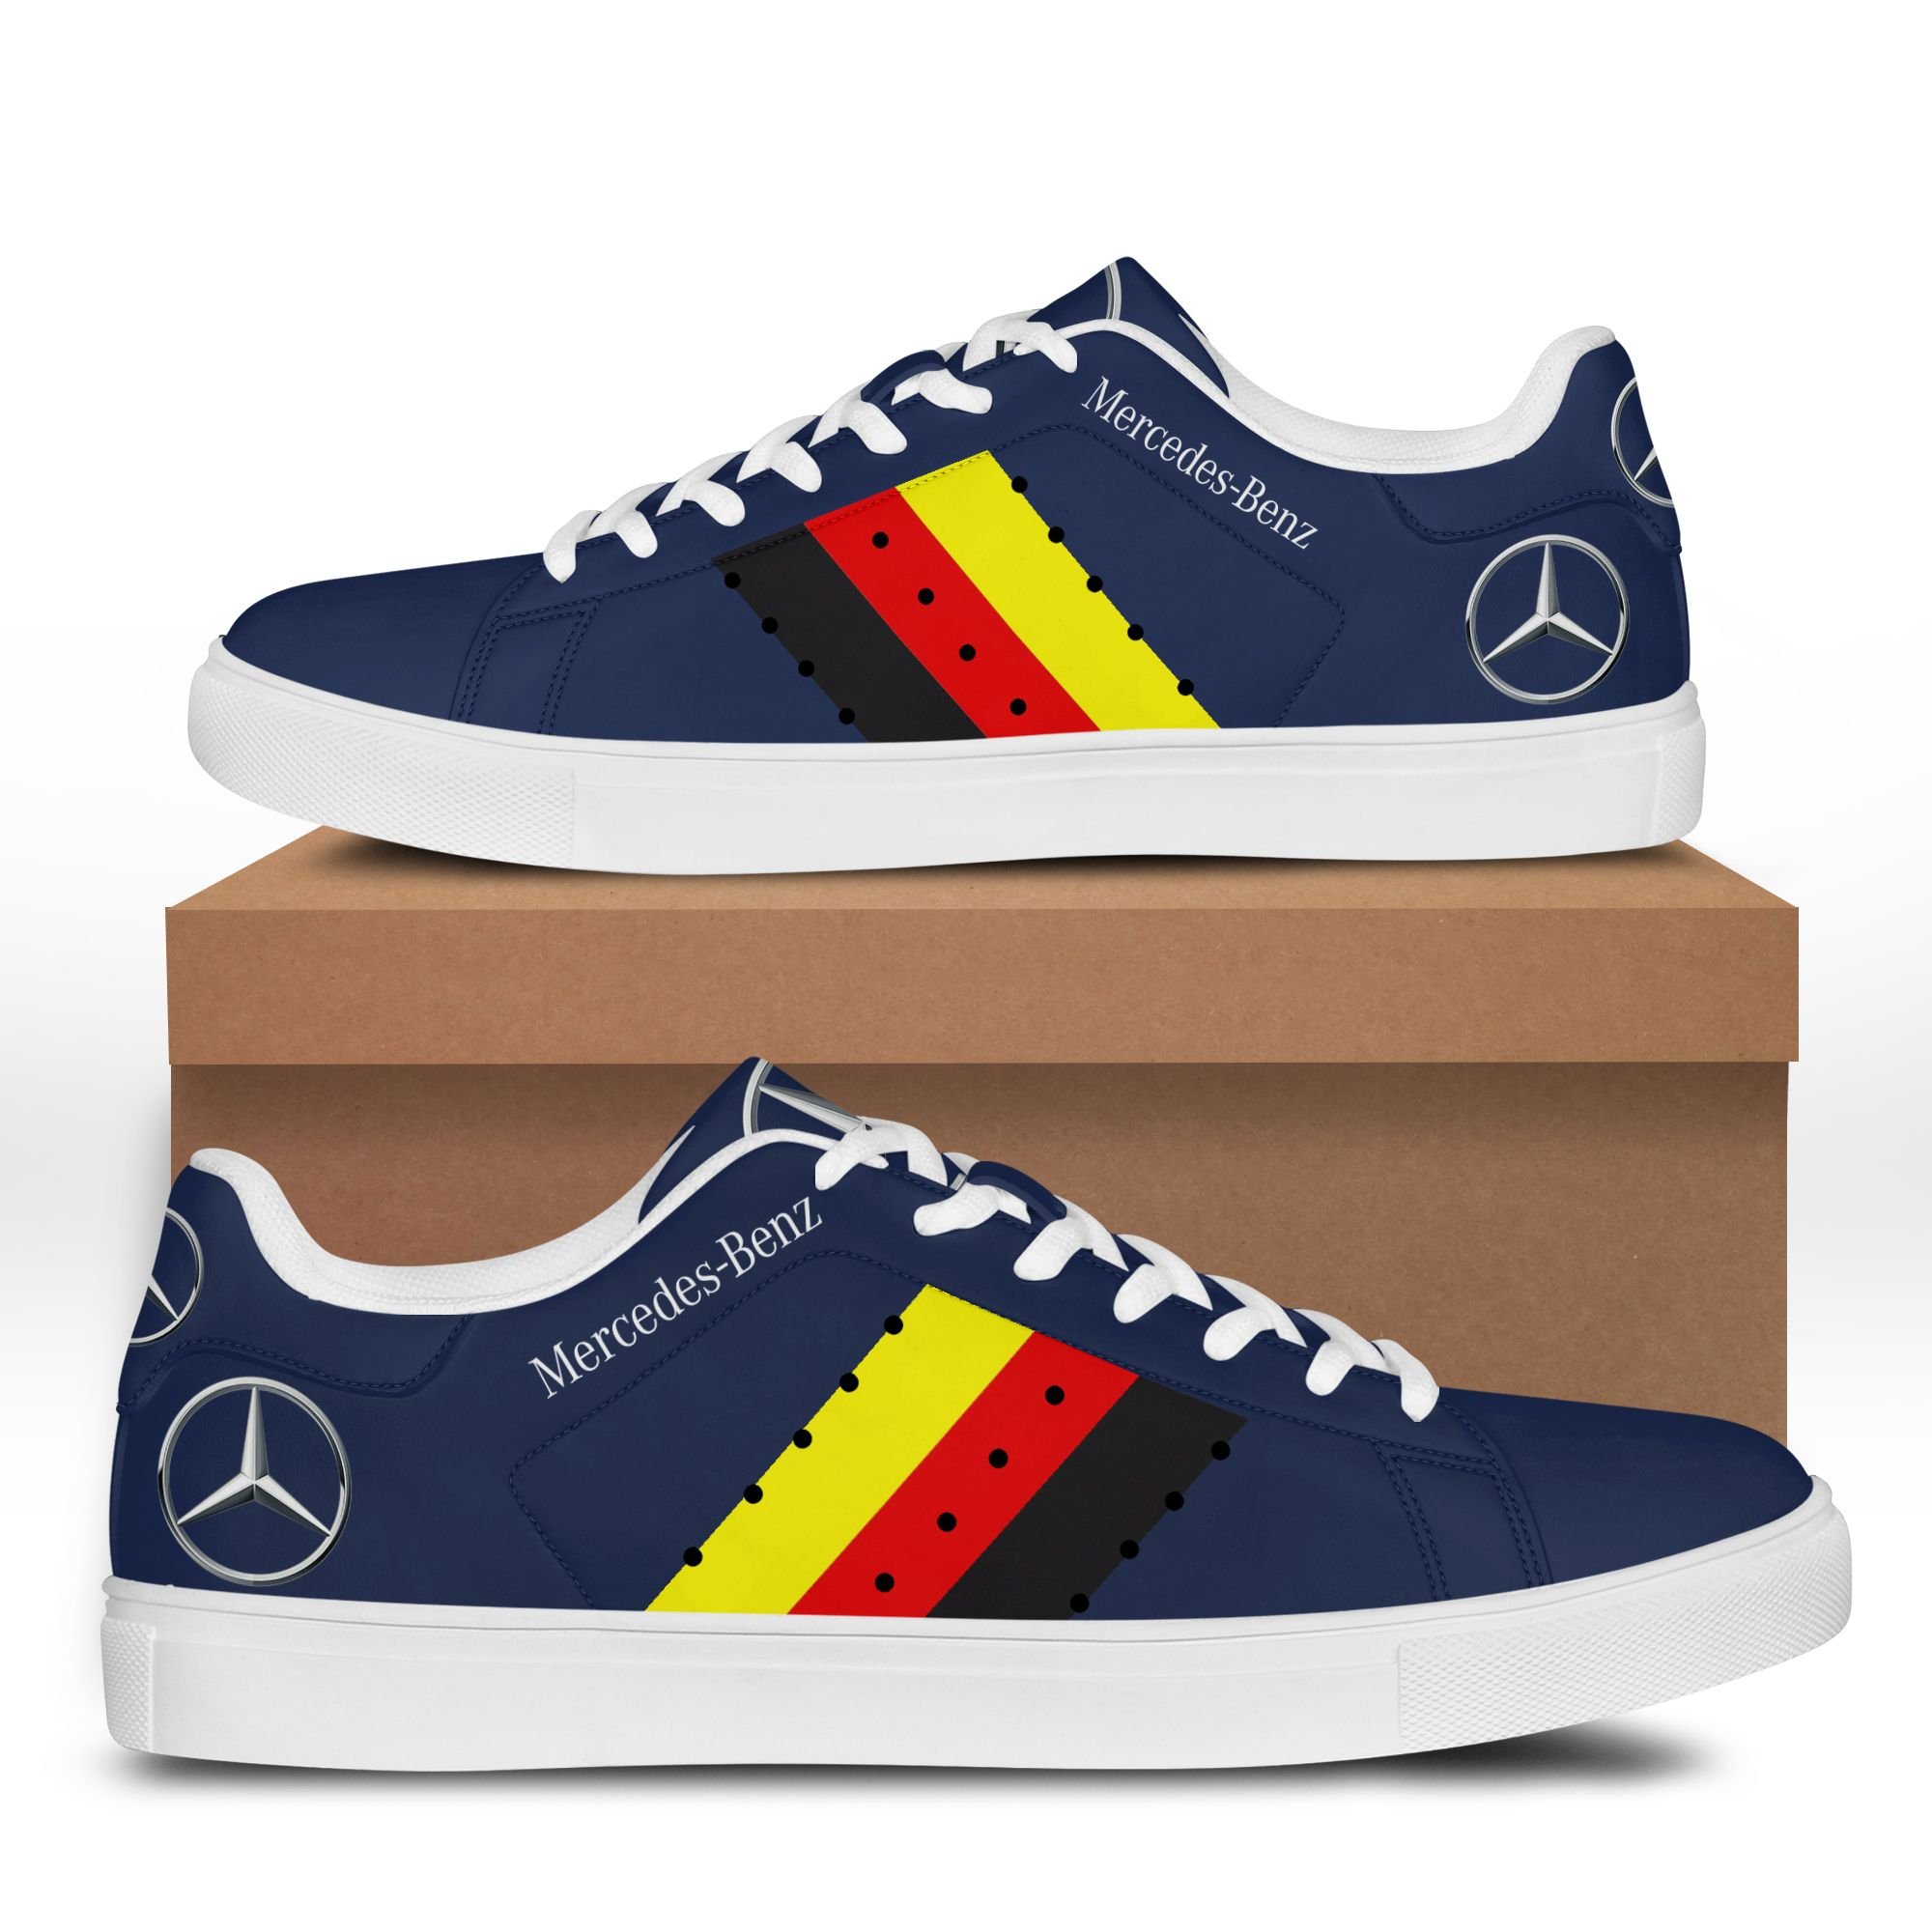 Mercedes-Benz stan smith shoes - Picture 3